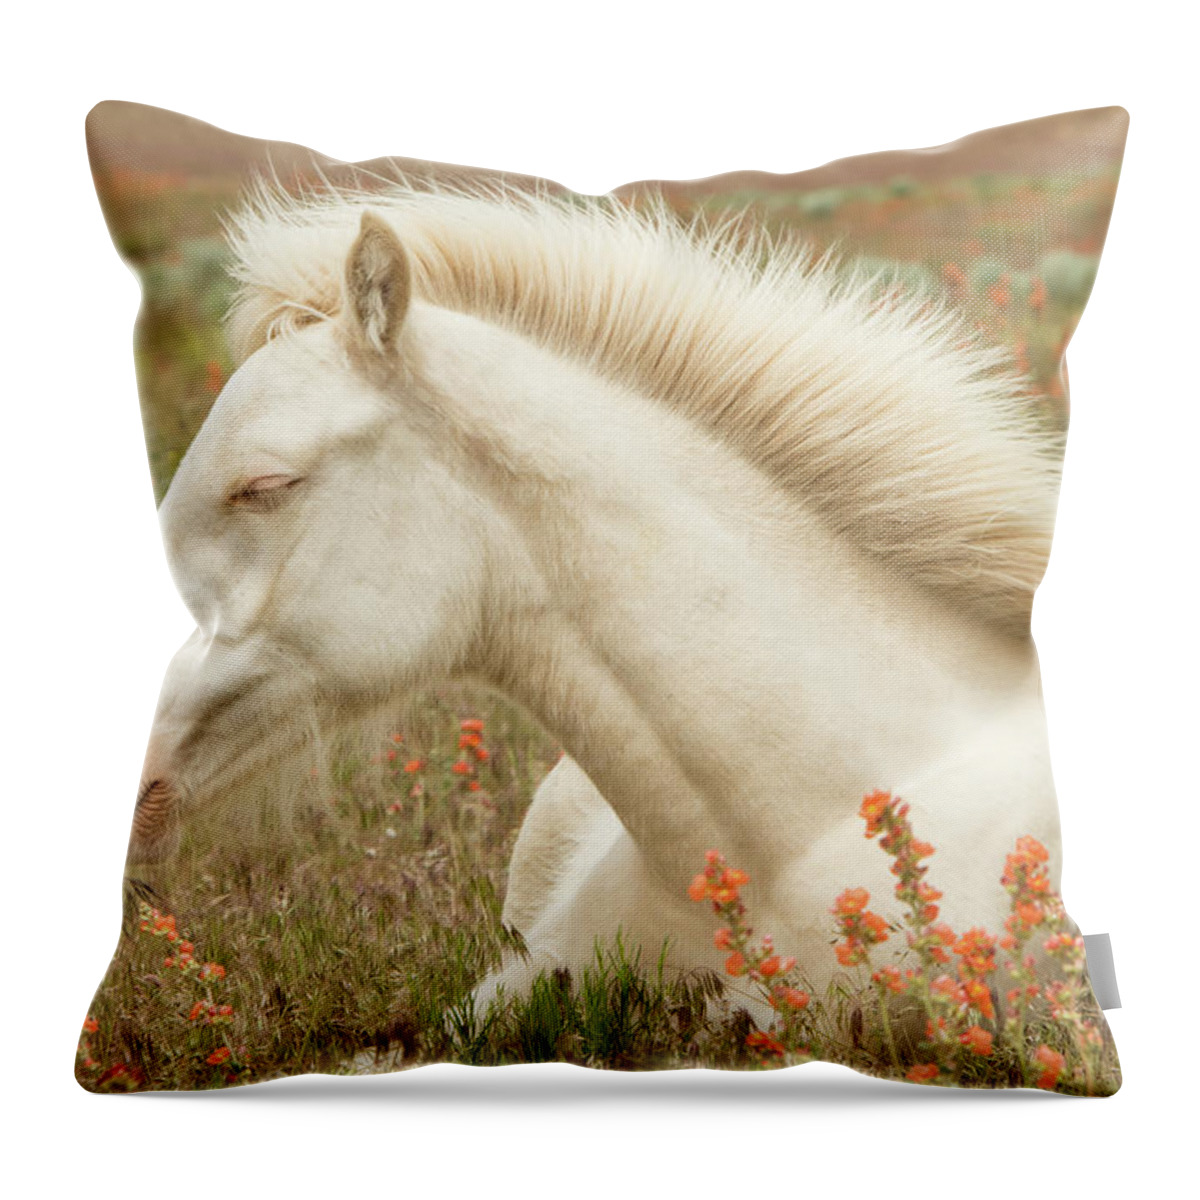 Horse Throw Pillow featuring the photograph Cremello Beauty by Kent Keller